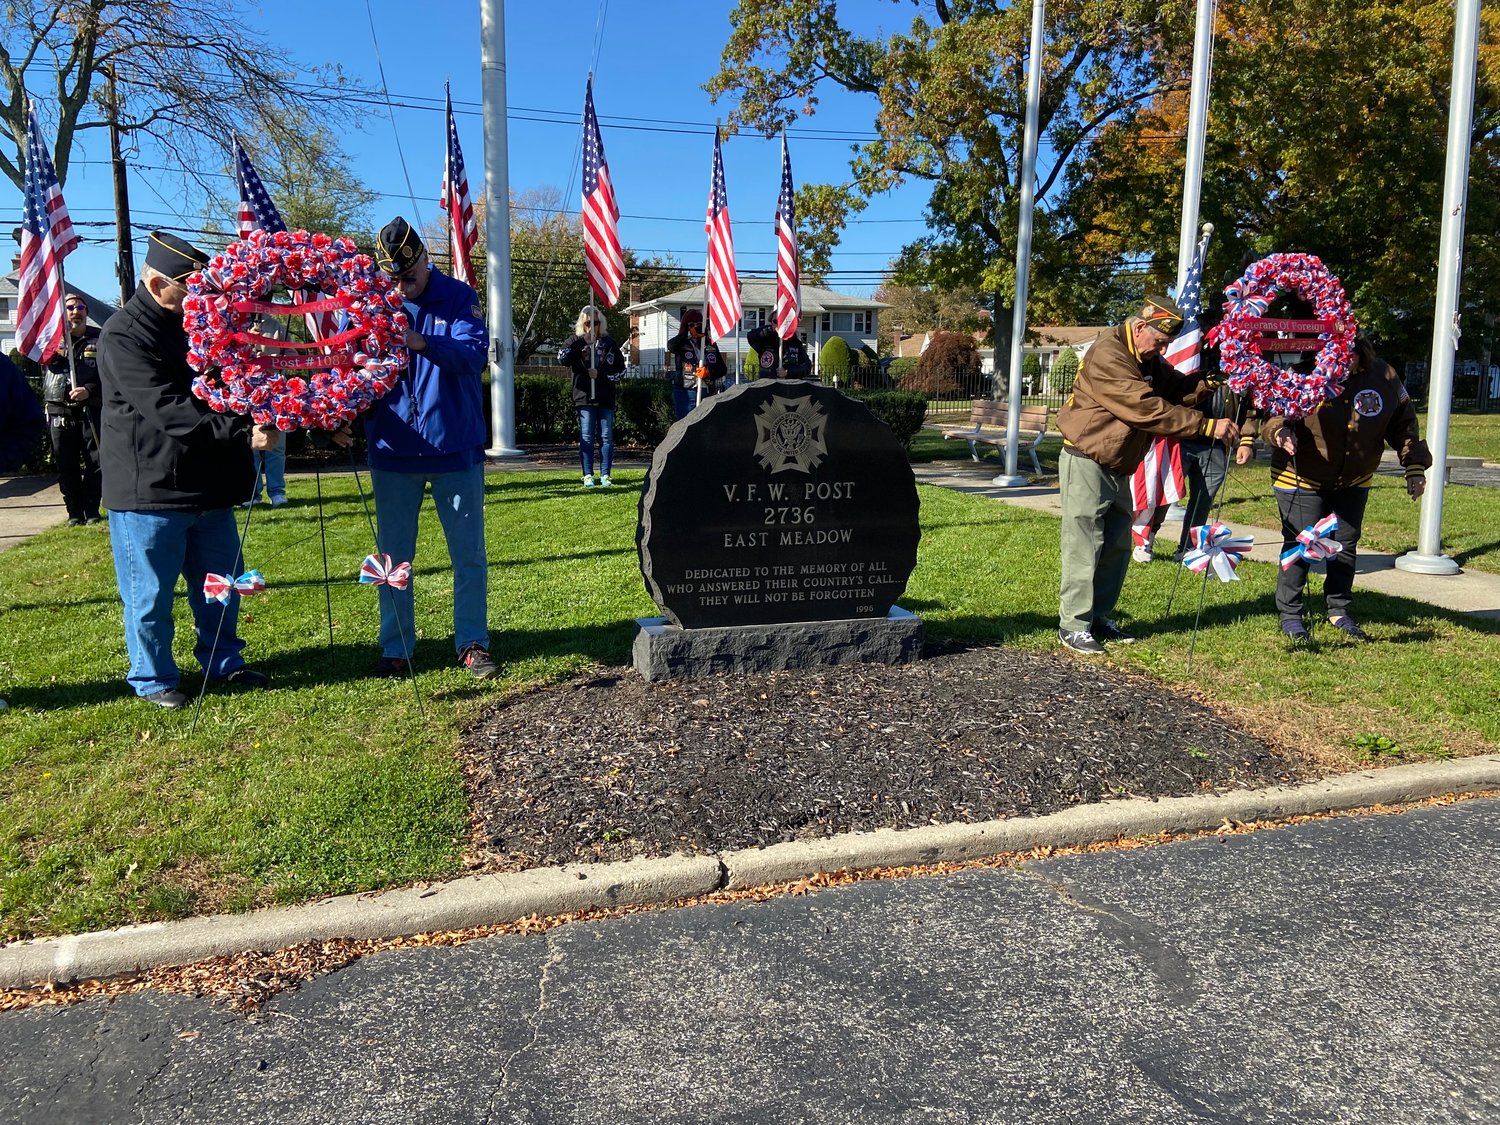 Members of East Meadow American Legion Post 1082 and Veterans of Foreign Wars Post 2736 laid wreaths next to the memorial.